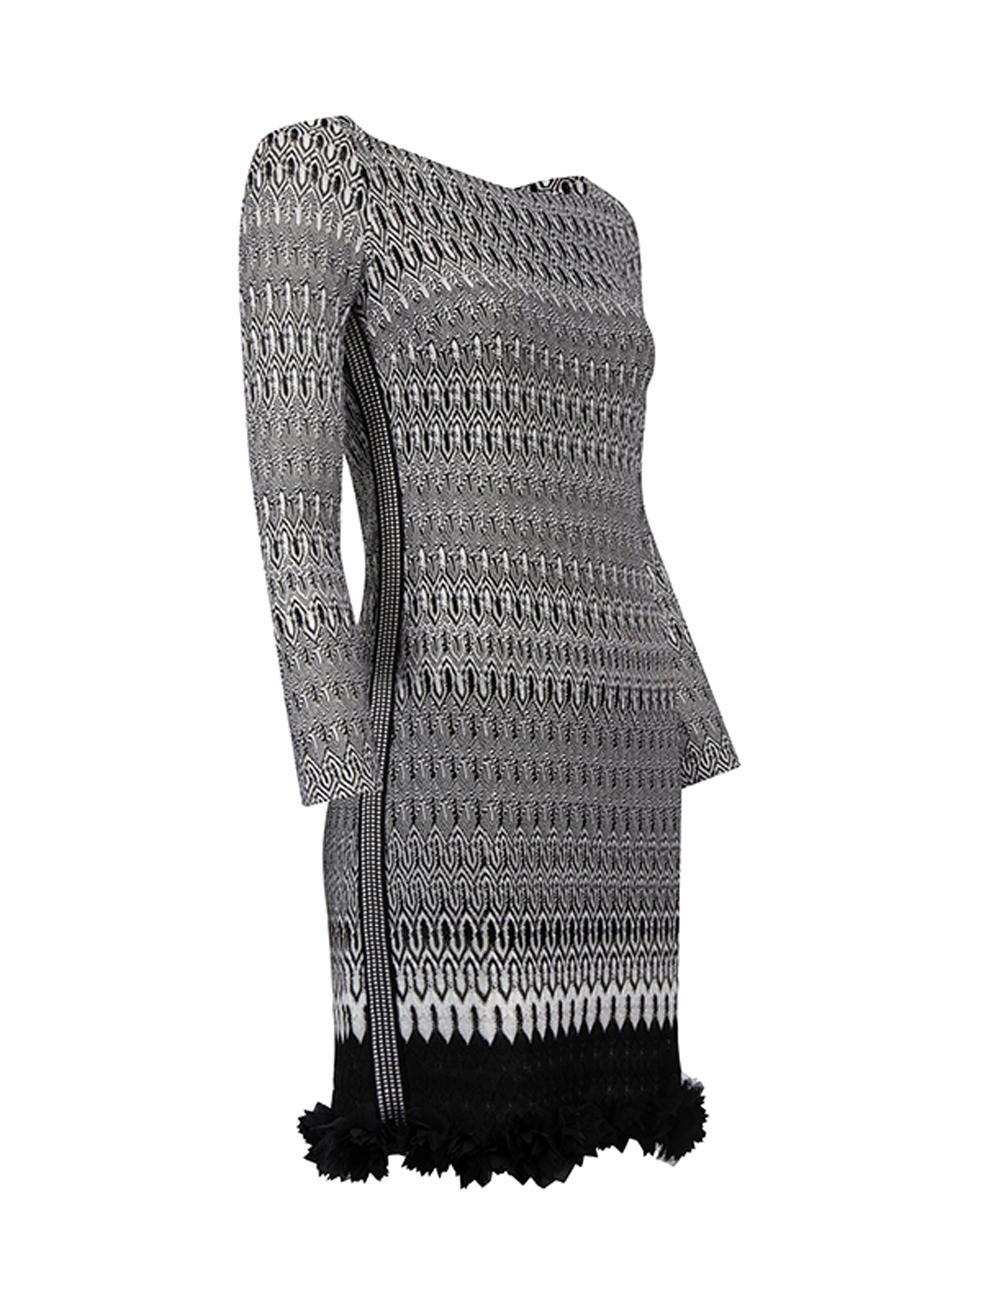 CONDITION is Never Worn. No visible wear to dress is evident on this used Missoni designer resale item. Details Black and white Synthetic Mini dress Ethnic pattern Long sleeves Boat neckline Flowers embellishment on hemline Made in Italy Composition